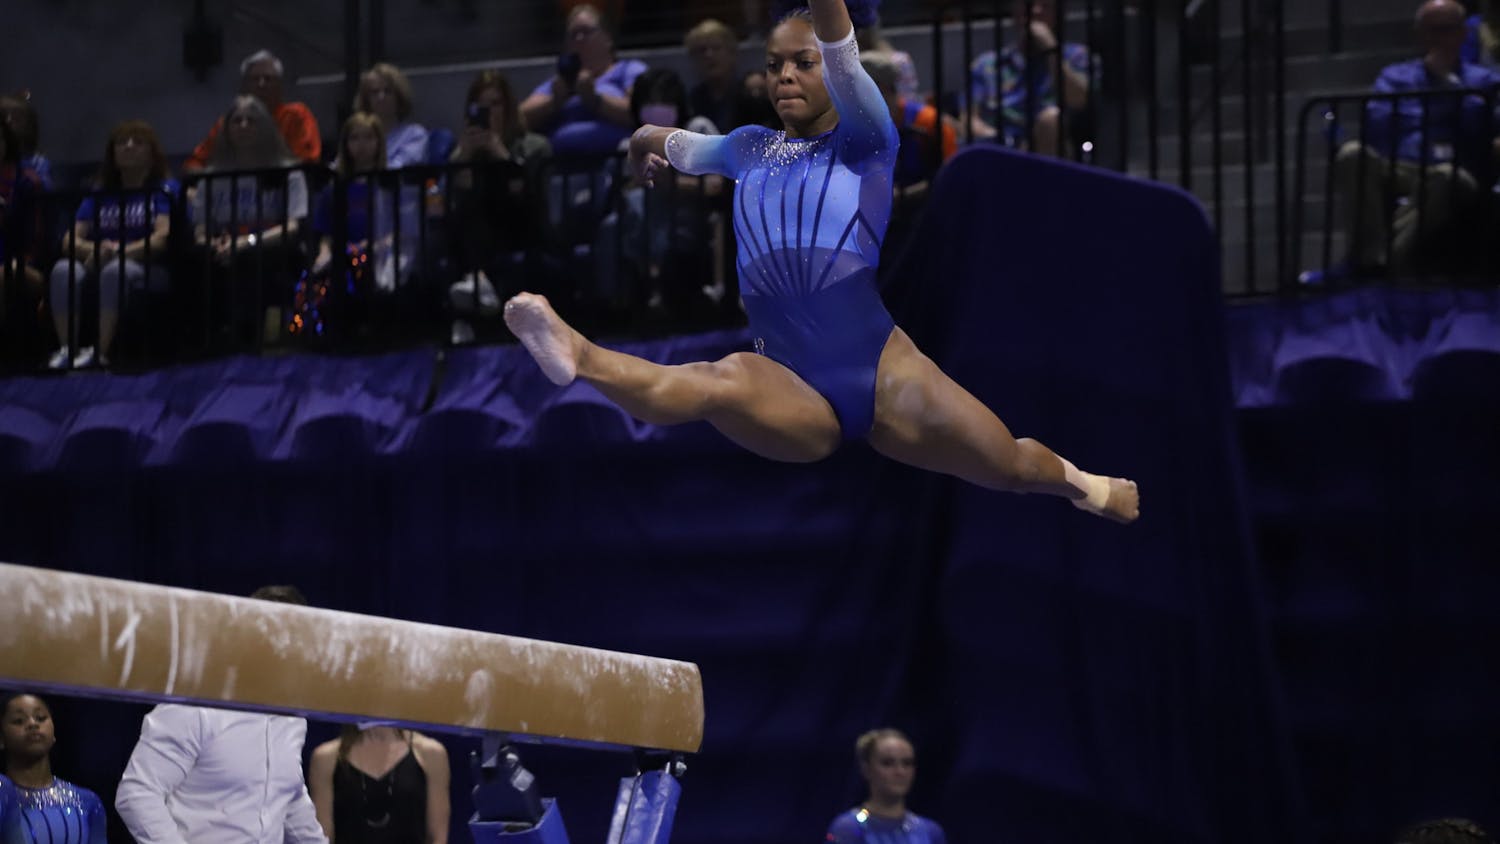 Senior Trinity Thomas announced she will return for her fifth year with UF Monday.